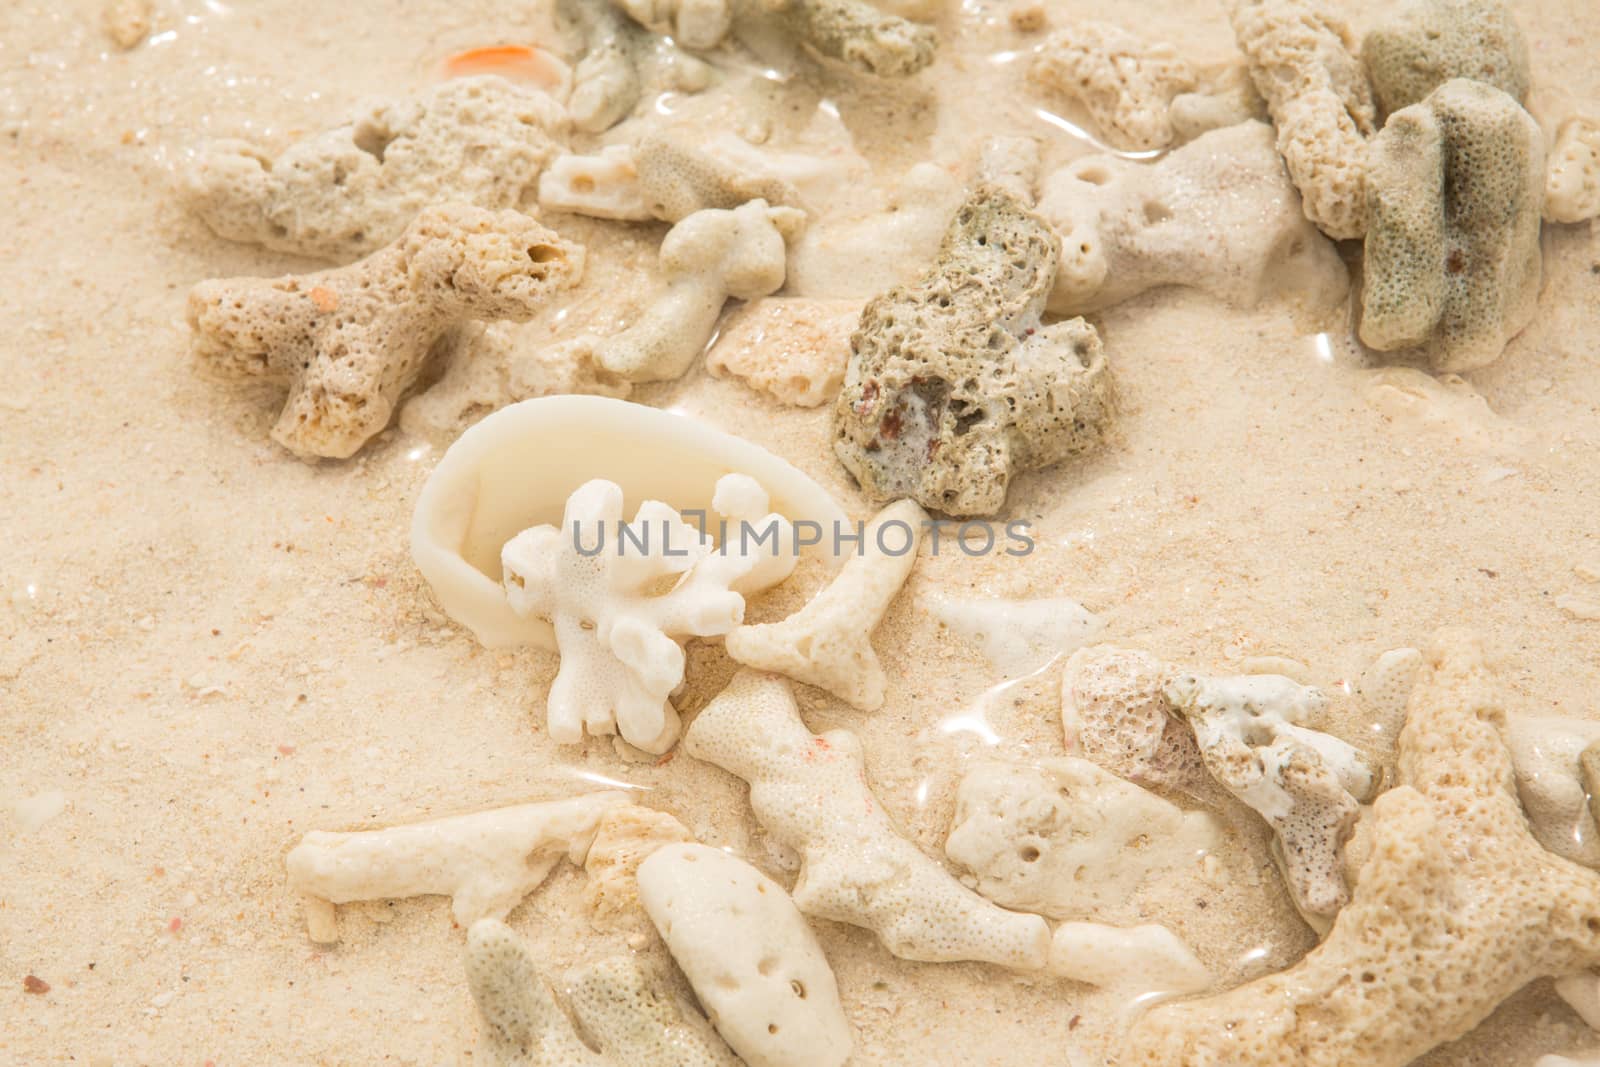 Coral and sea shell on a sand